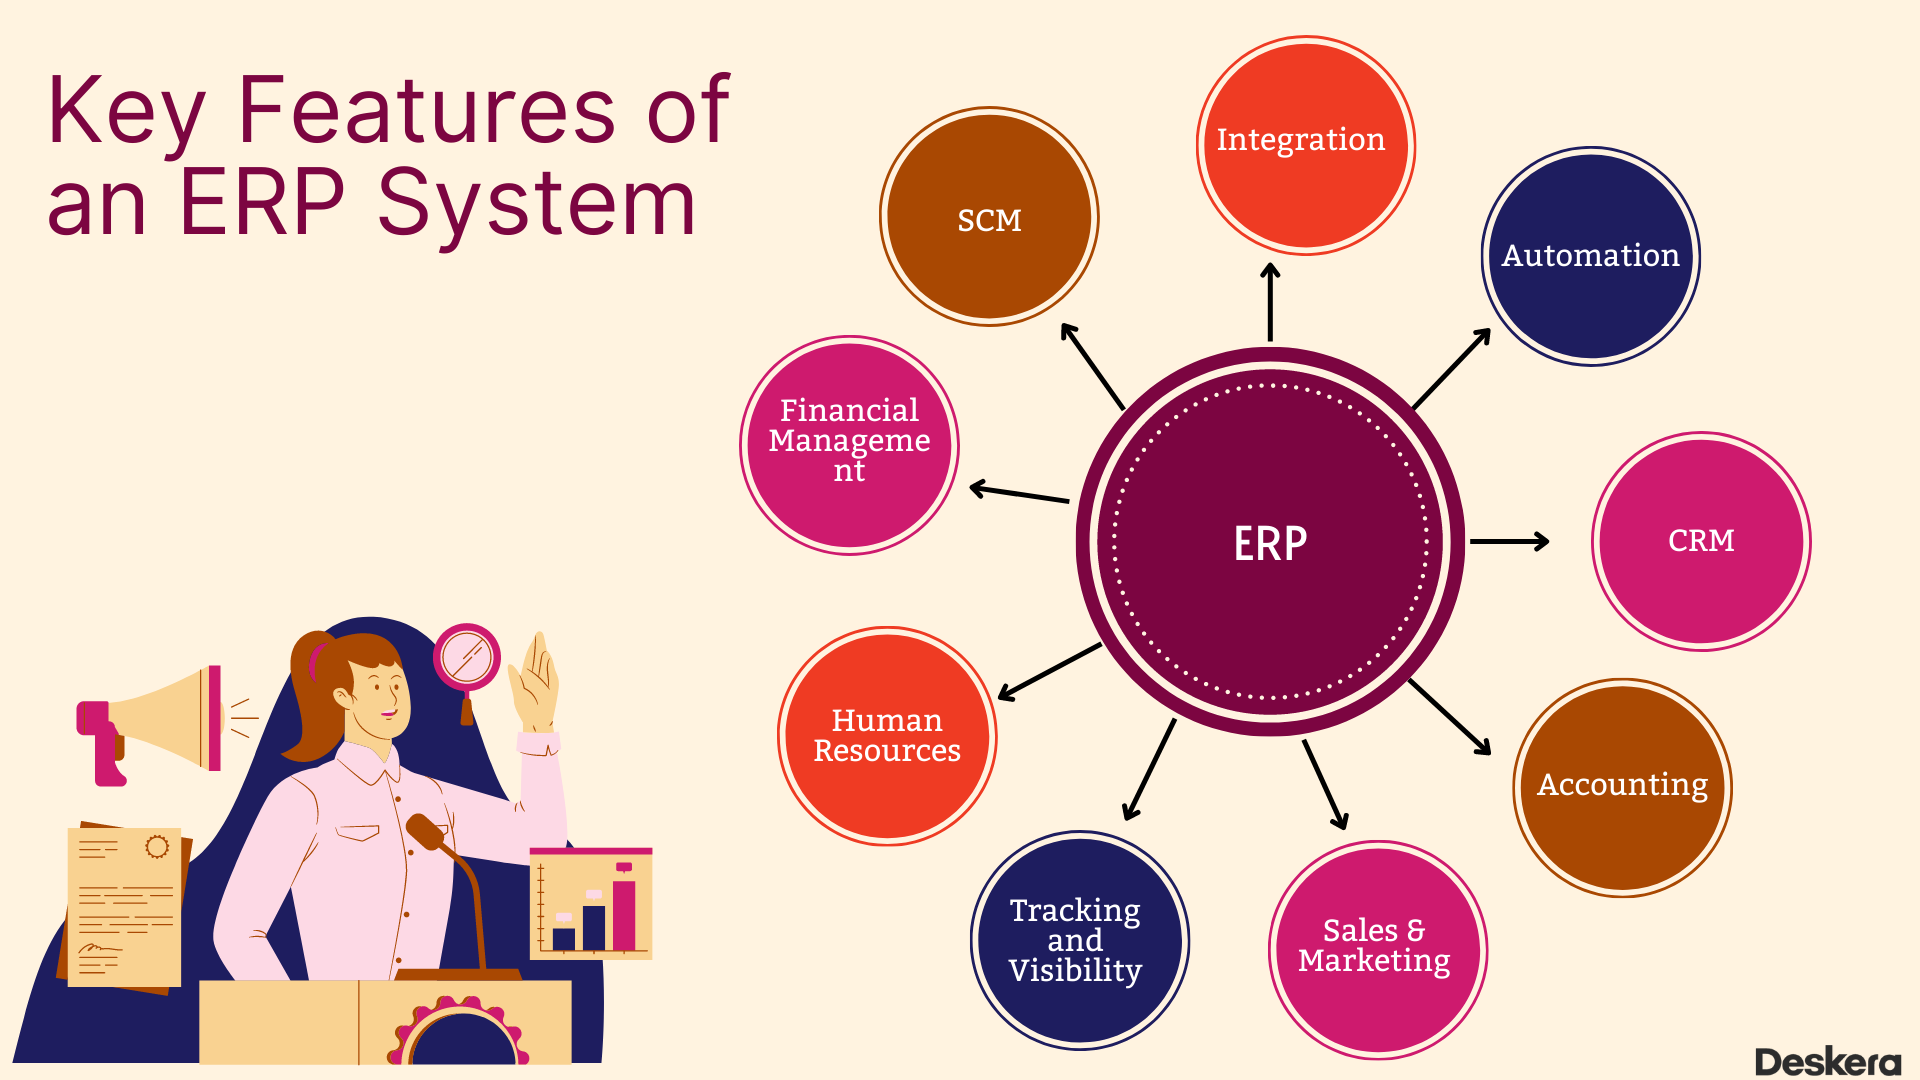 Key Features of an ERP System